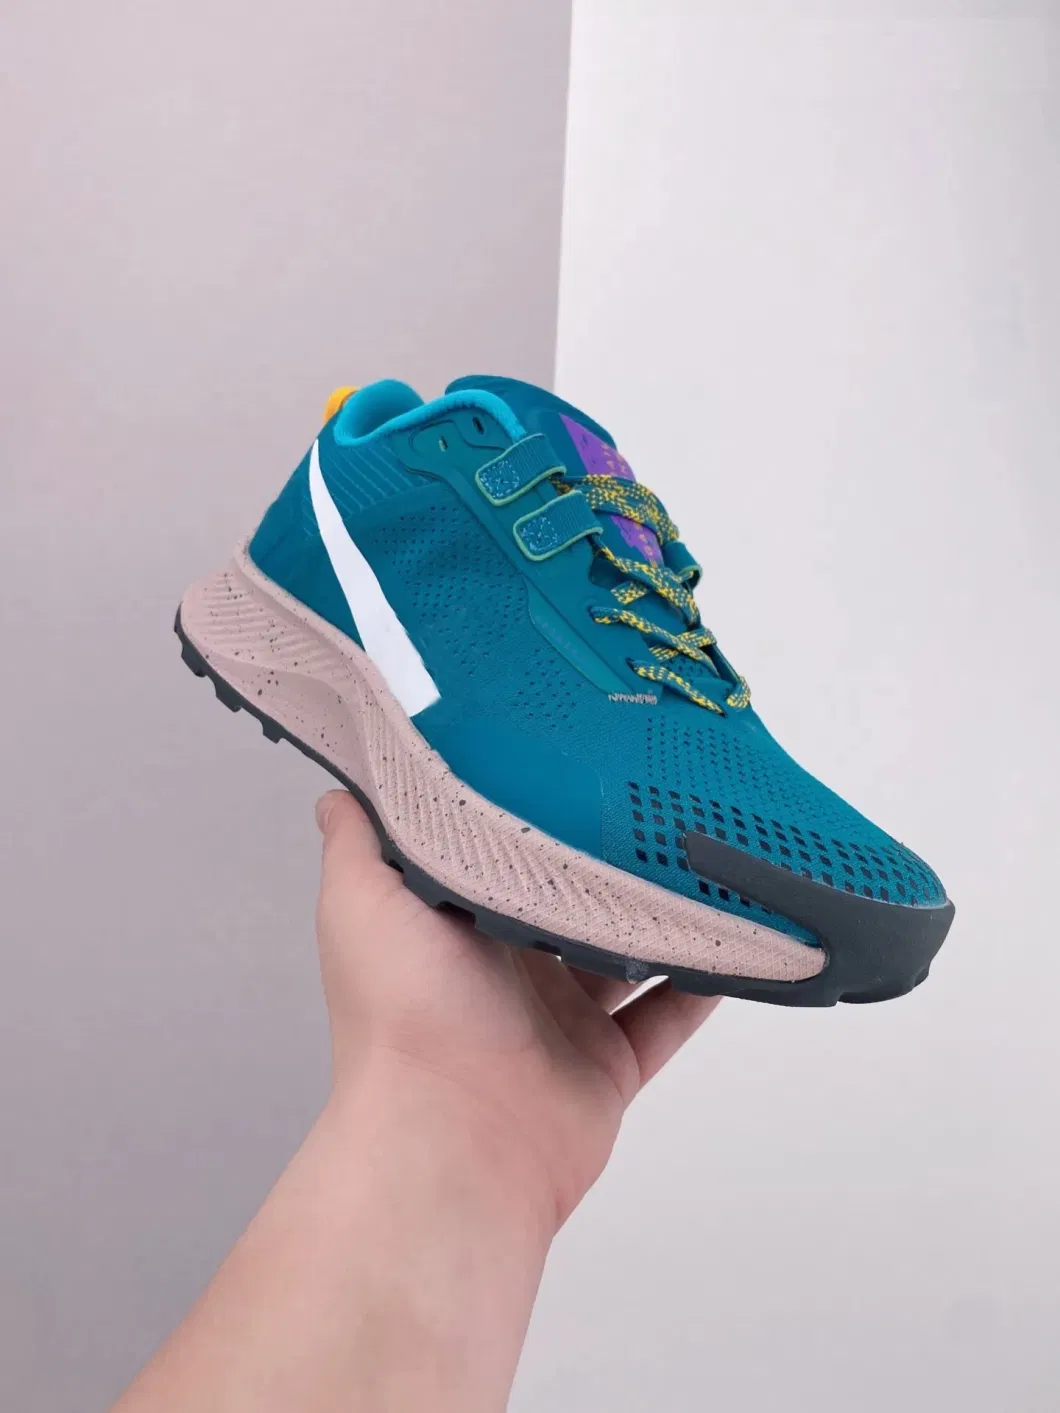 Hot Sale Trail Pegasus 3 Gtx Men Women Athletic Shoes Running Shoes 3s Designer Basketball Shoes Rugged Outdoor Sports Sneakers Replica Online Store